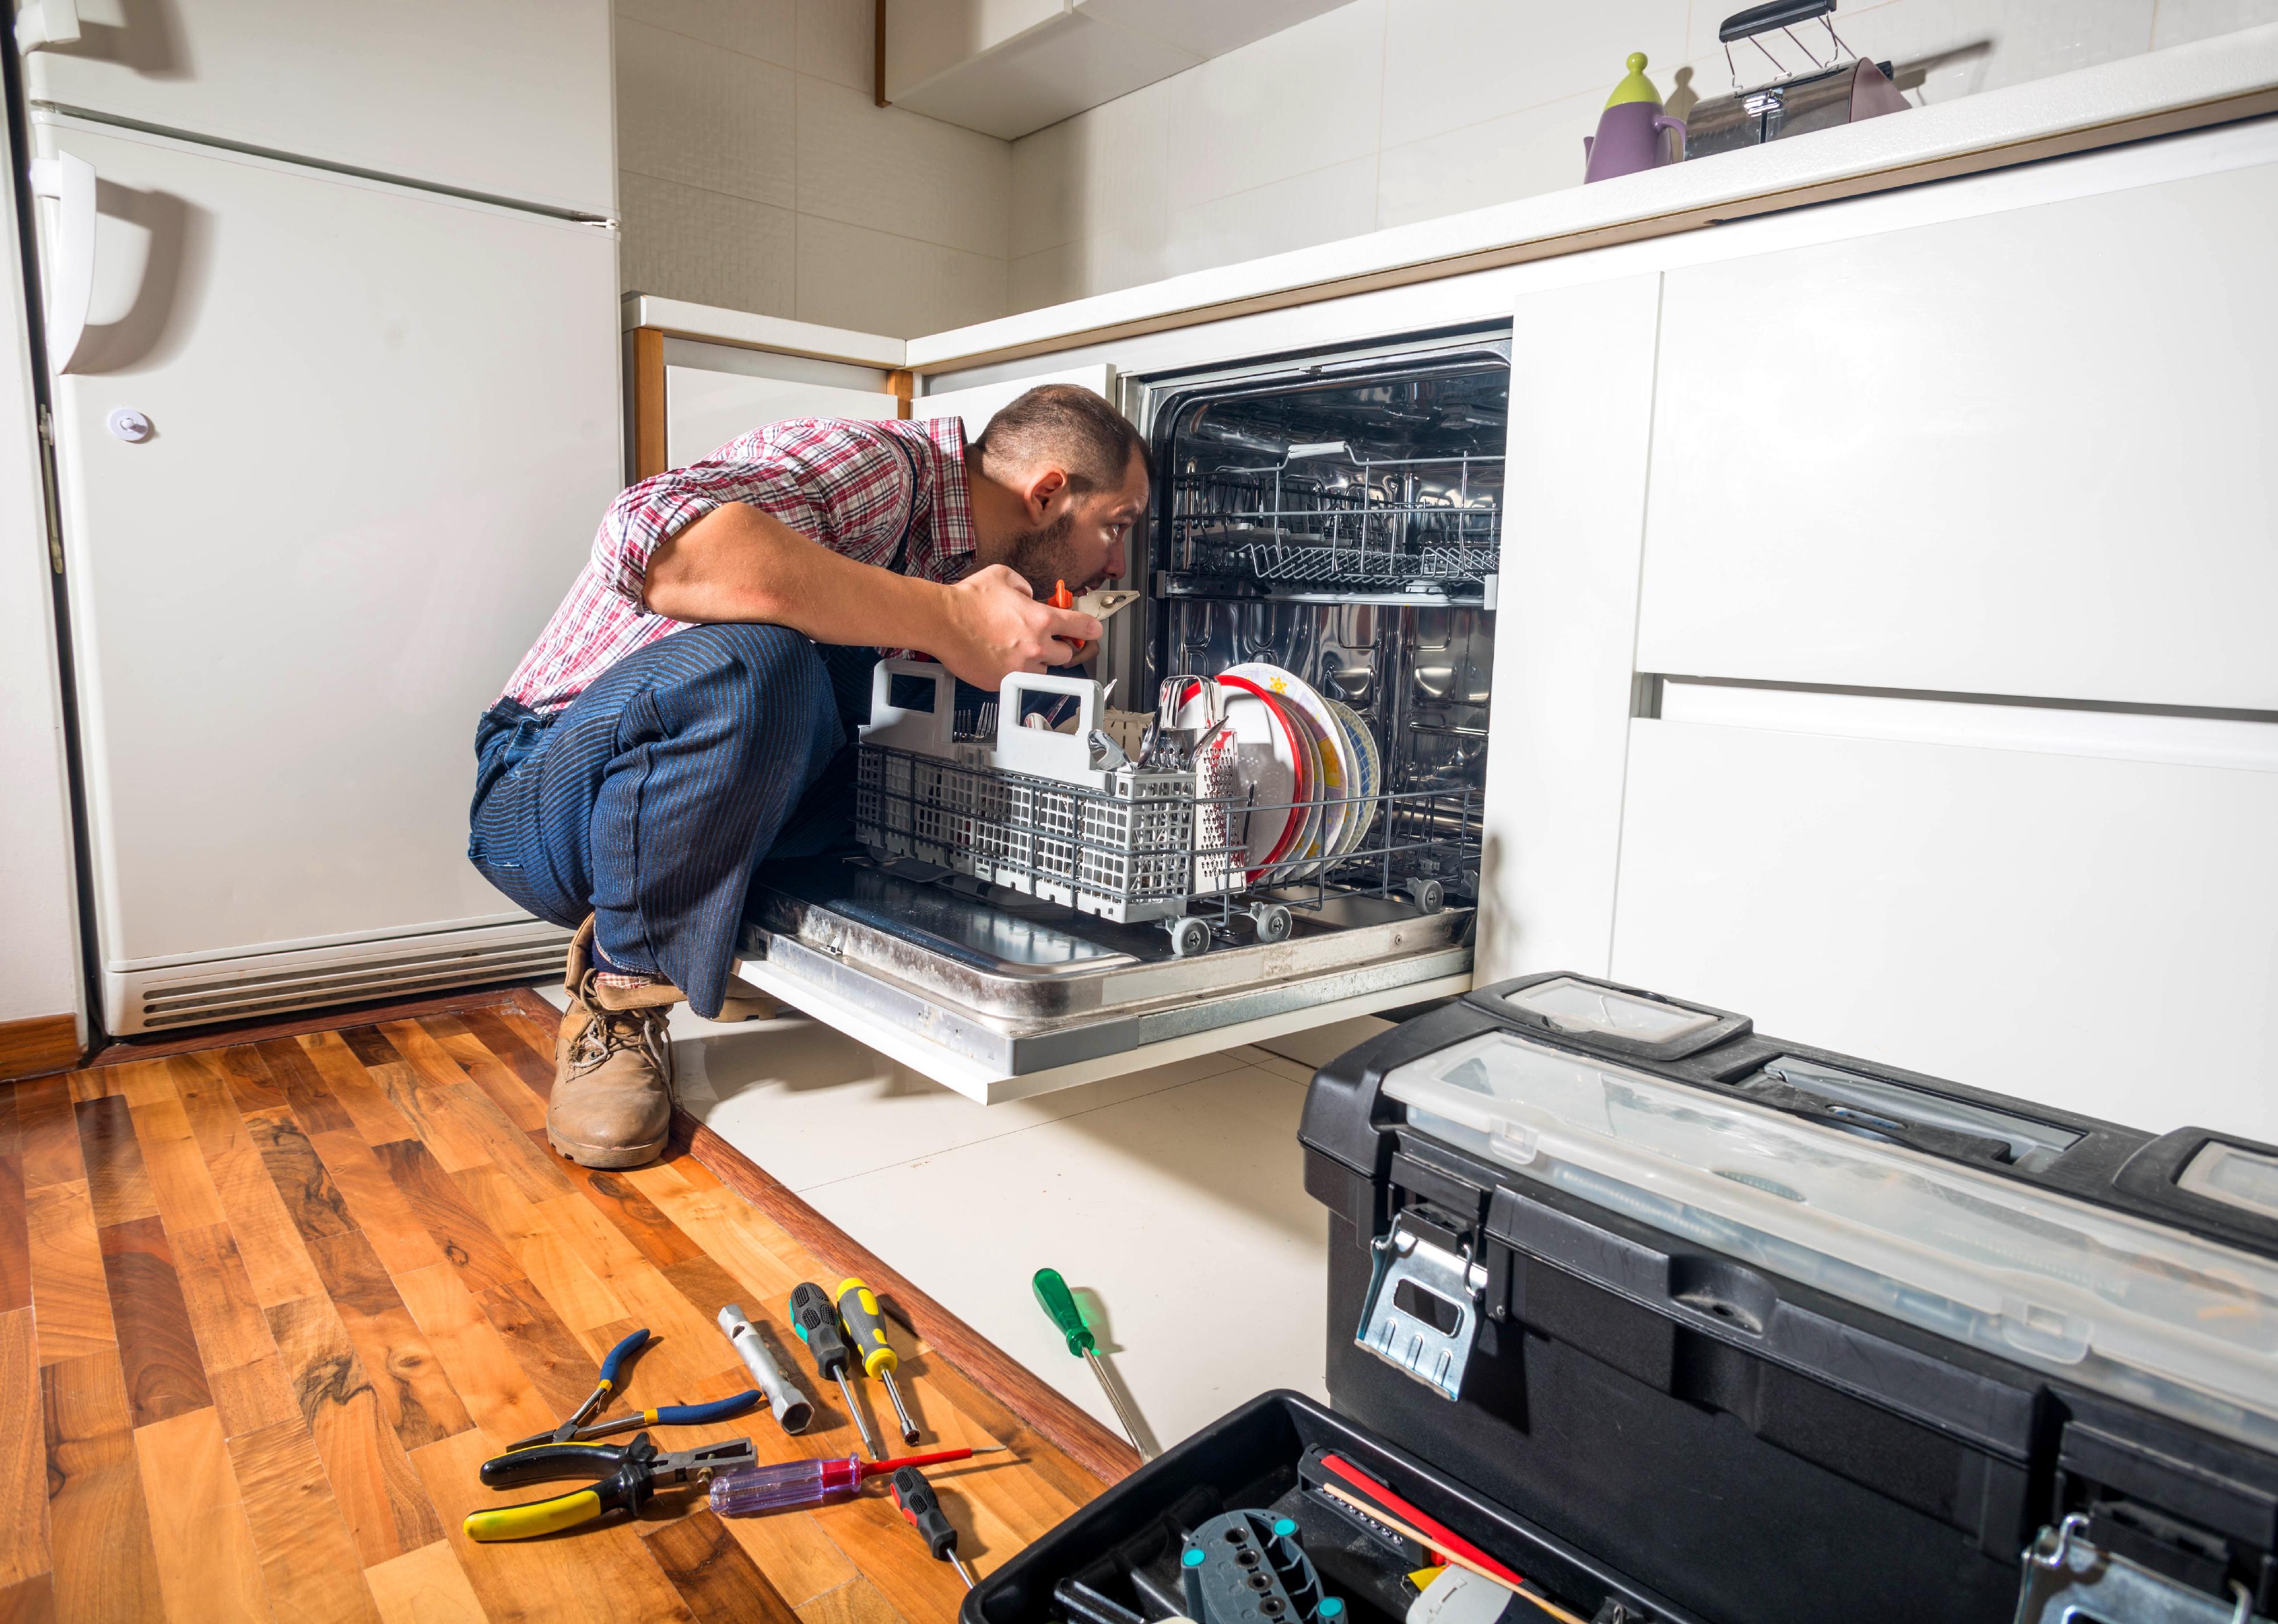 Person repairs dishwasher in a kitchen.